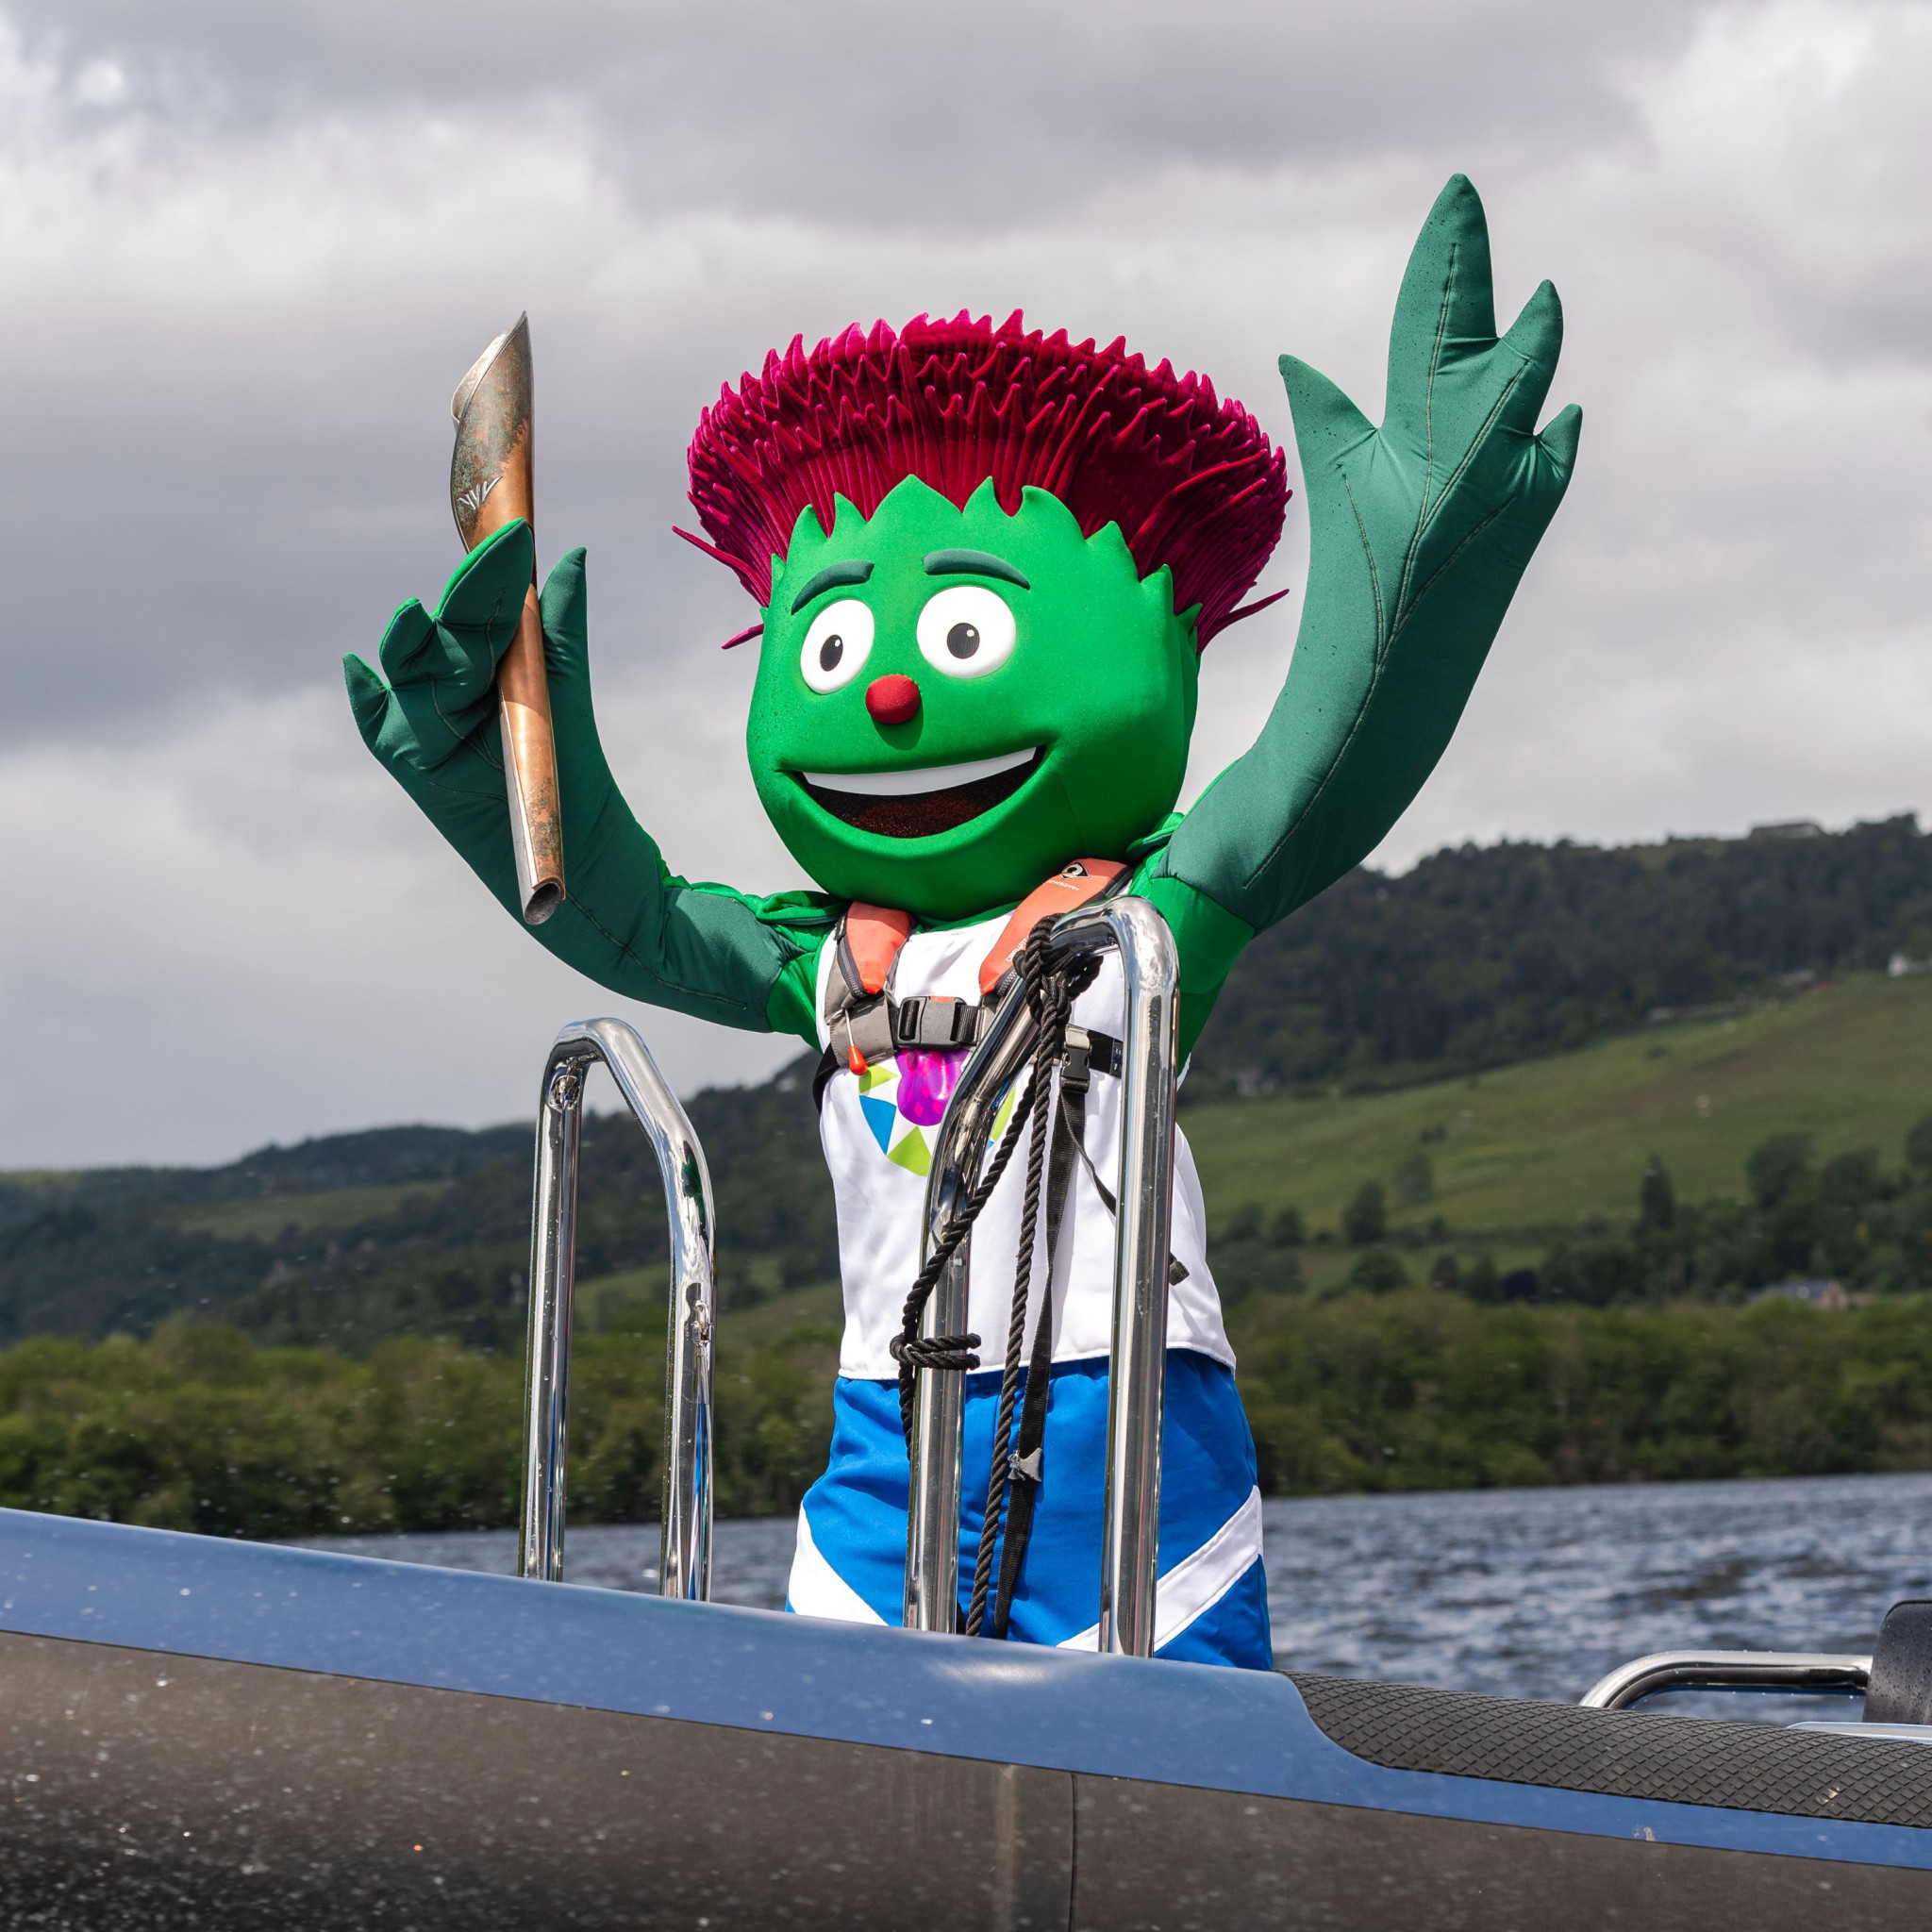 Glasgow 2014 mascot Clyde returns to carry Queen's Baton